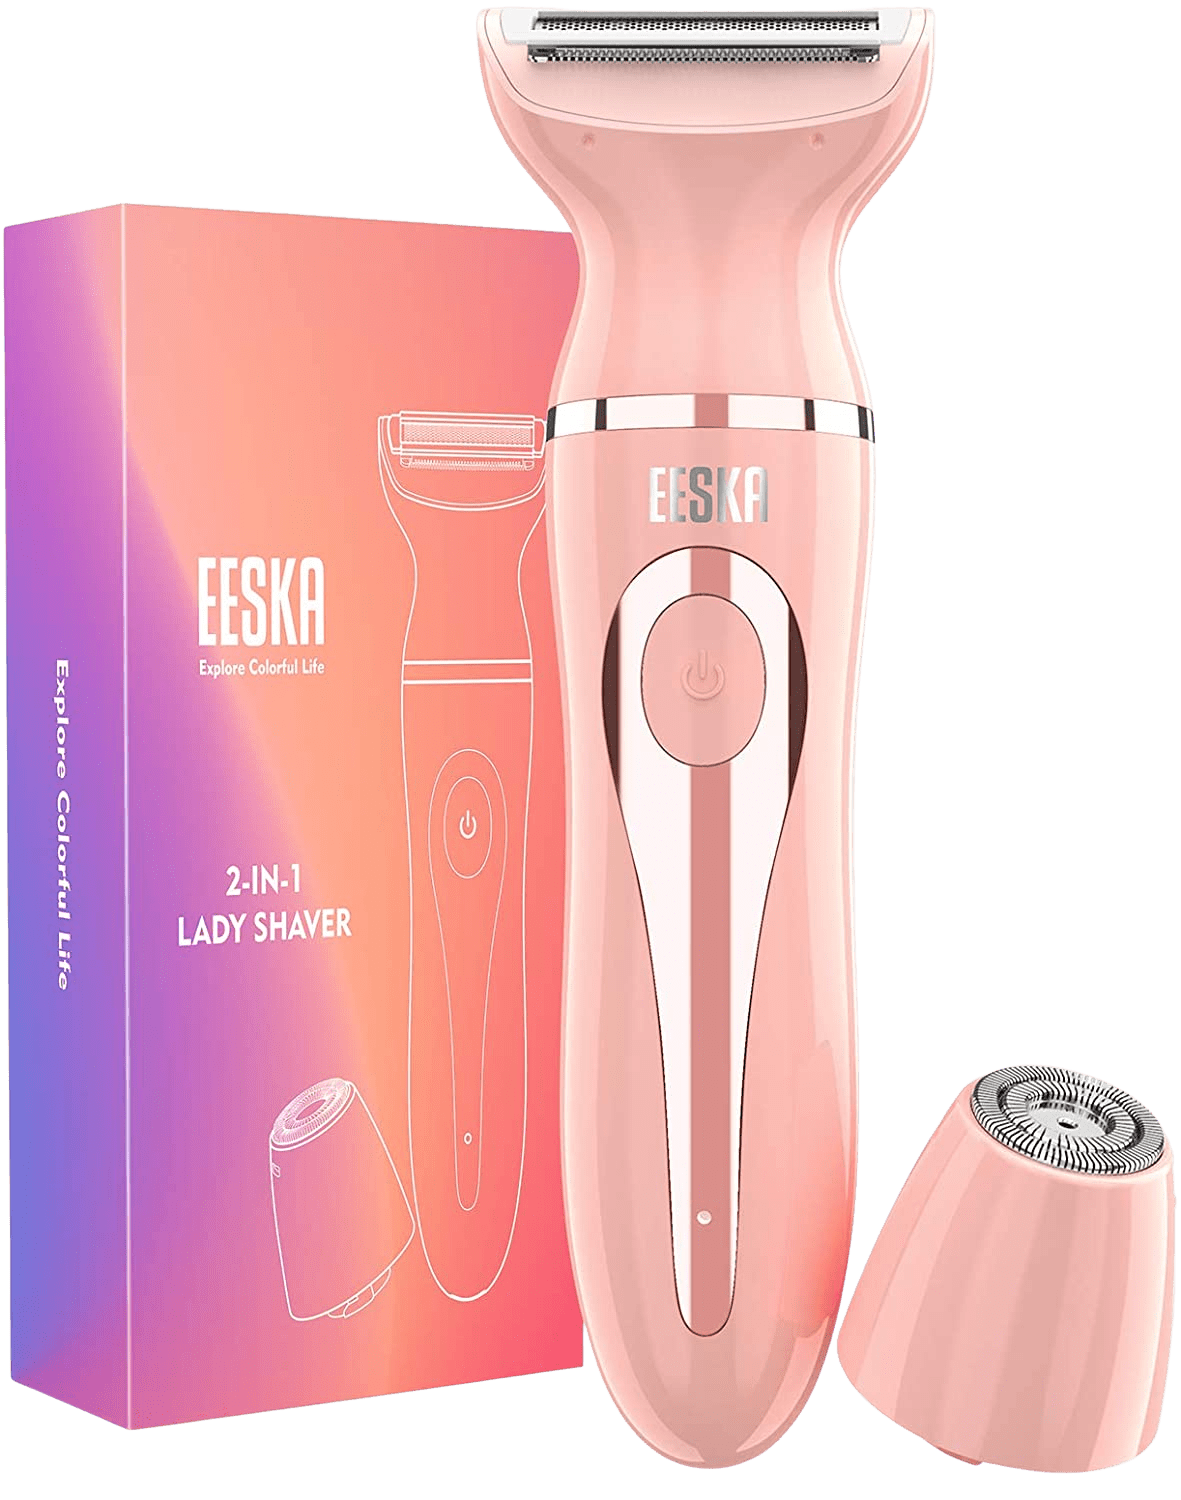 Electric Razor for Women, EESKA 2-in-1 Womens Shaver for Face Legs and Underarm, Portable Bikini Trimmer Ladies Shaver, IPX7 Waterproof Wet and Dry Hair Removal, Type C USB Recharge Pink - Home Decor Gifts and More